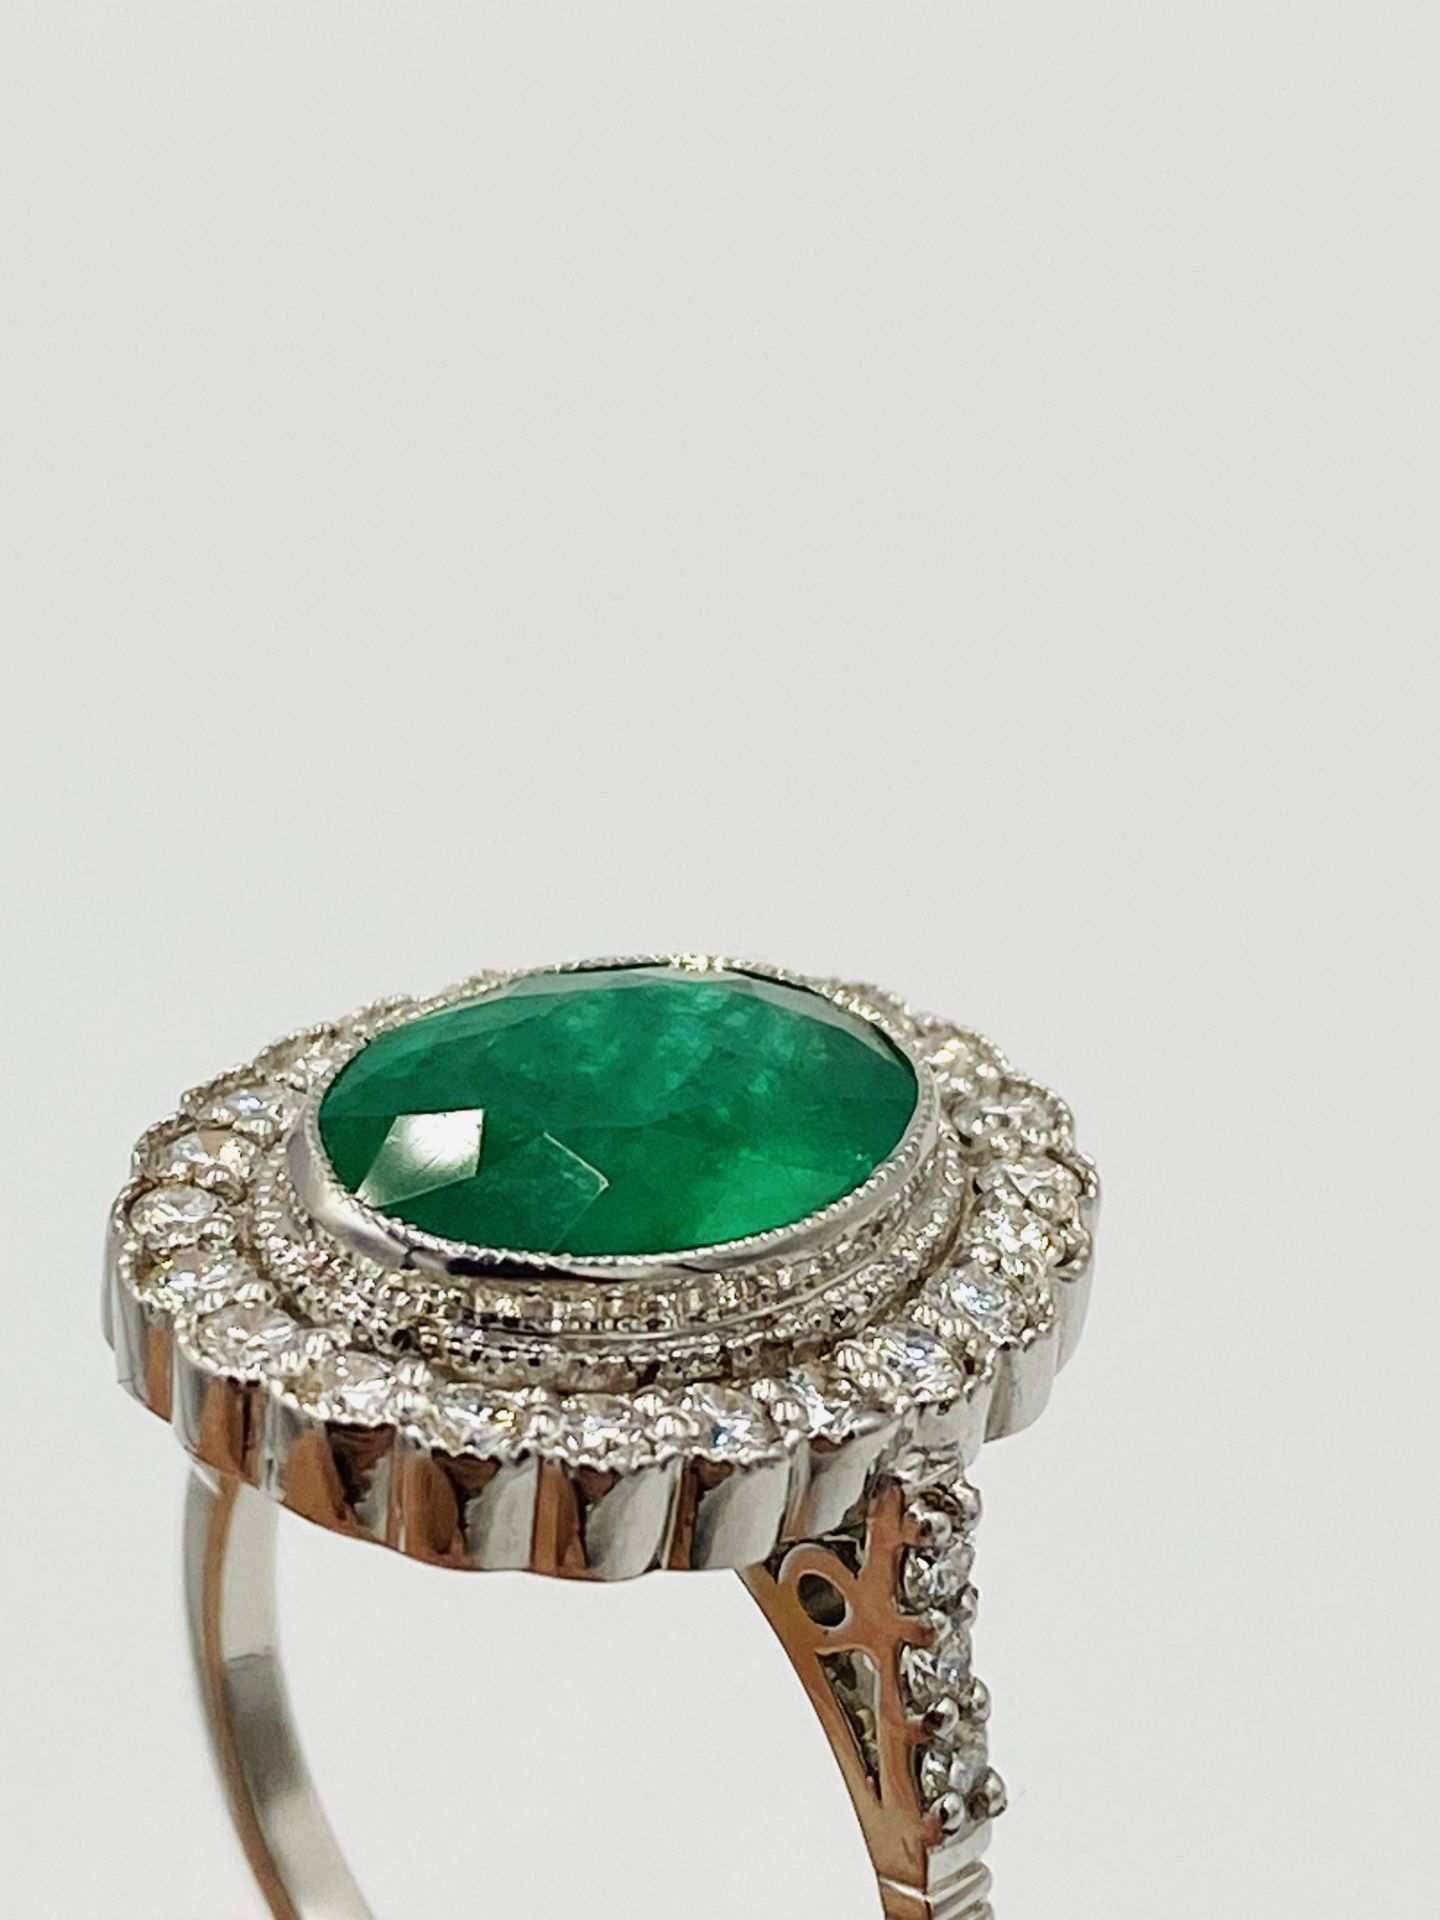 18ct white gold ring set with a oval emerald and diamond surround - Image 3 of 7